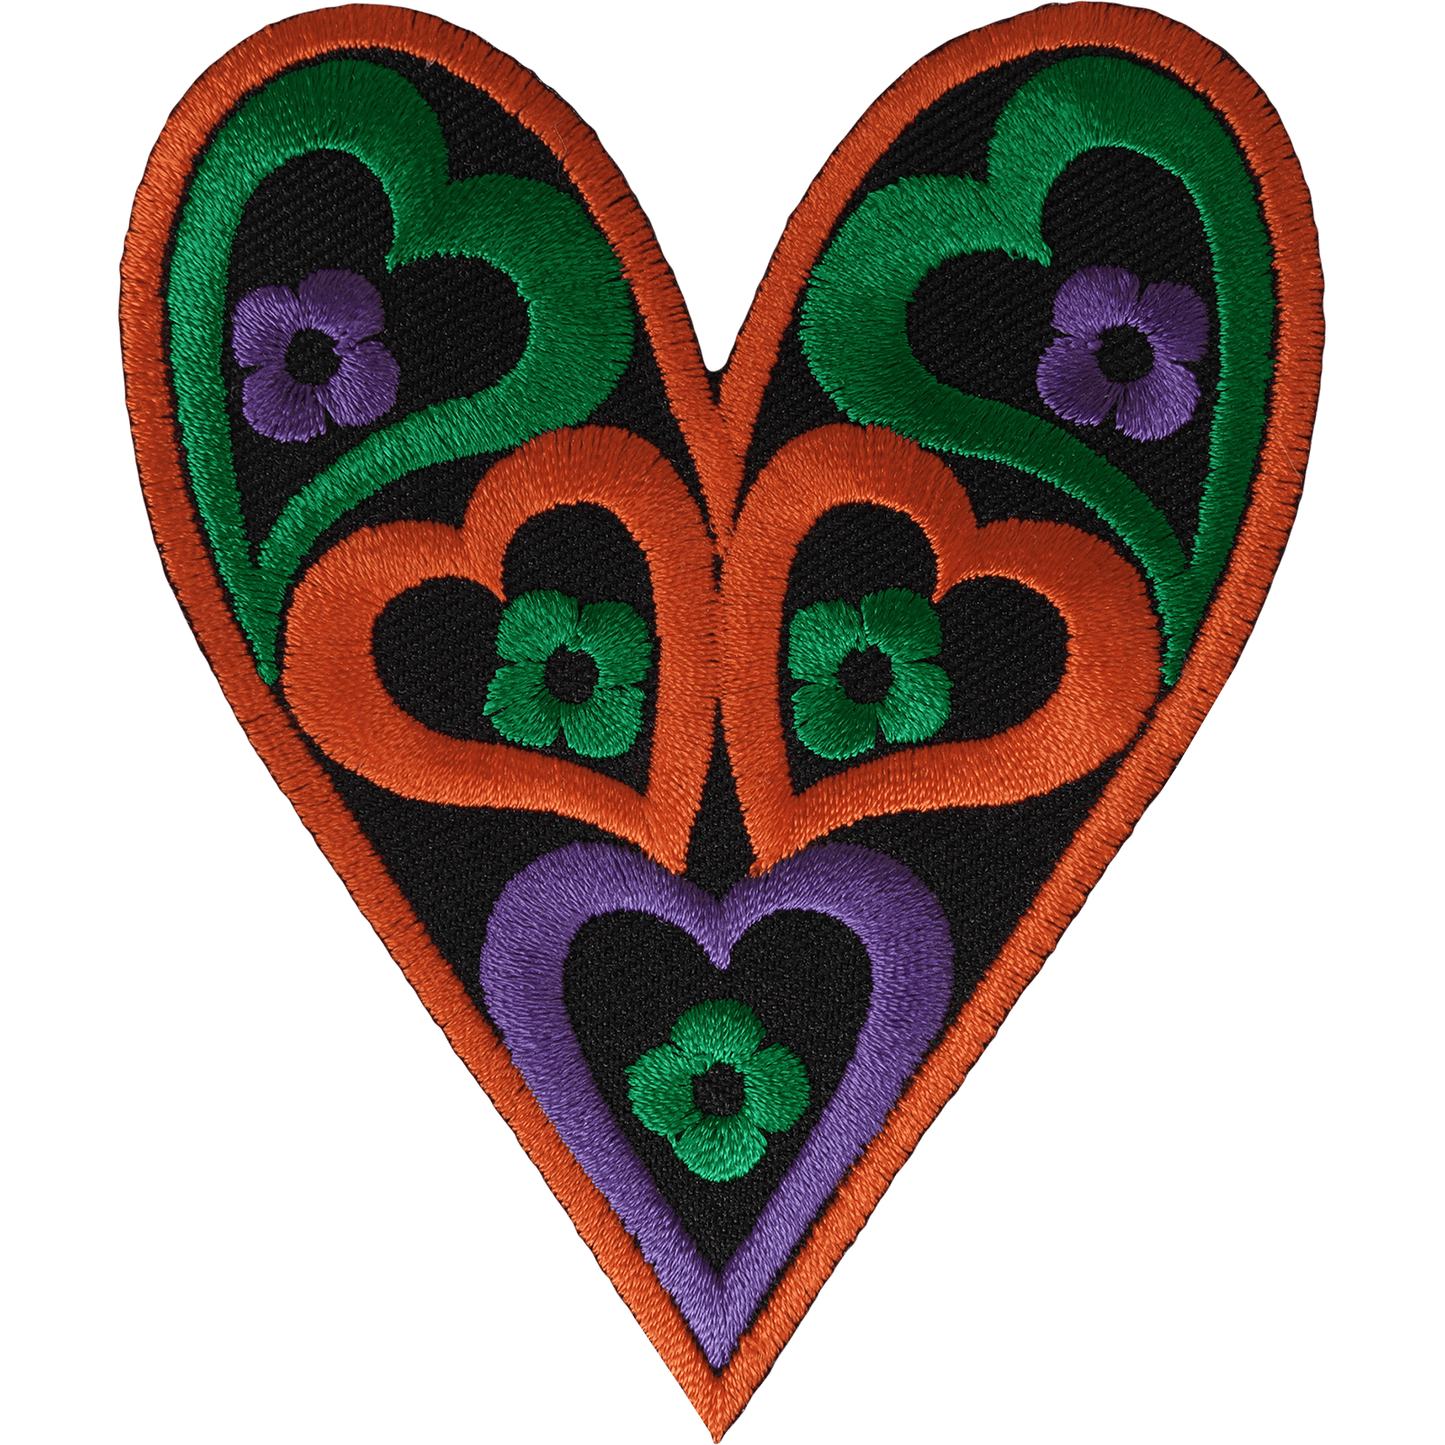 Heart Iron On Patch Sew On Embroidered Applique Hippie Flower Embroidery Badge